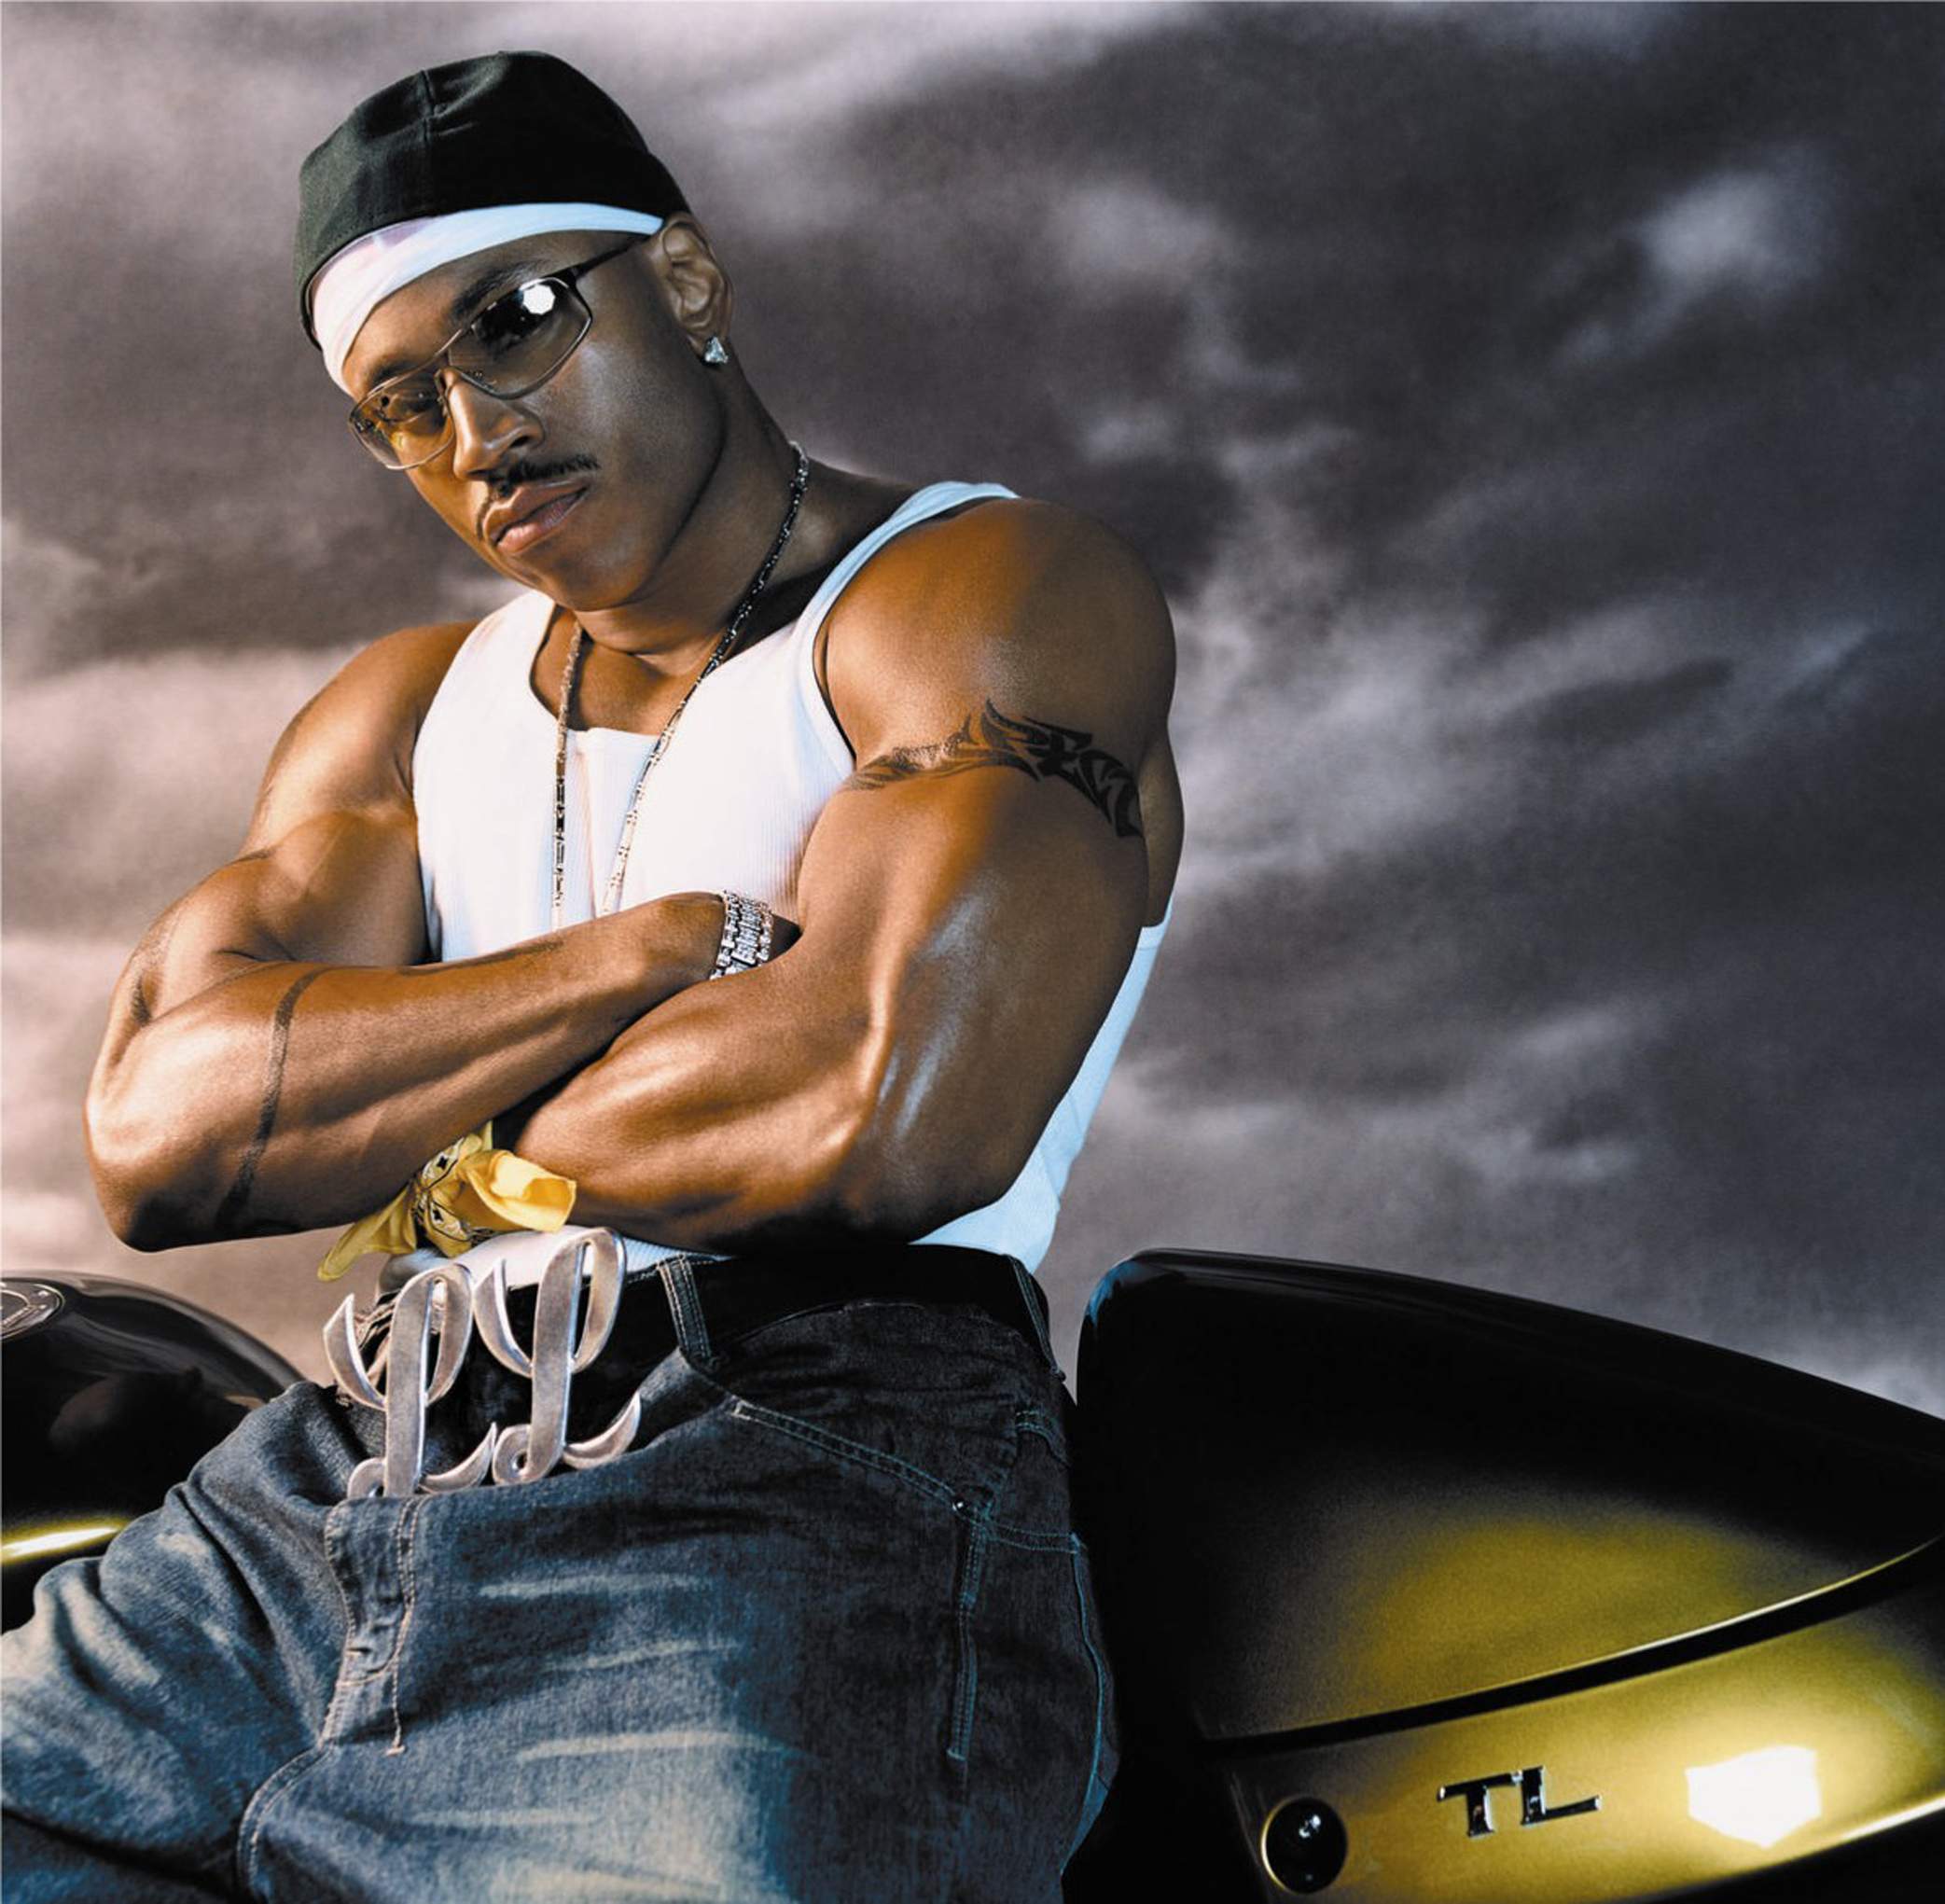 Ll Cool J - Photo Colection